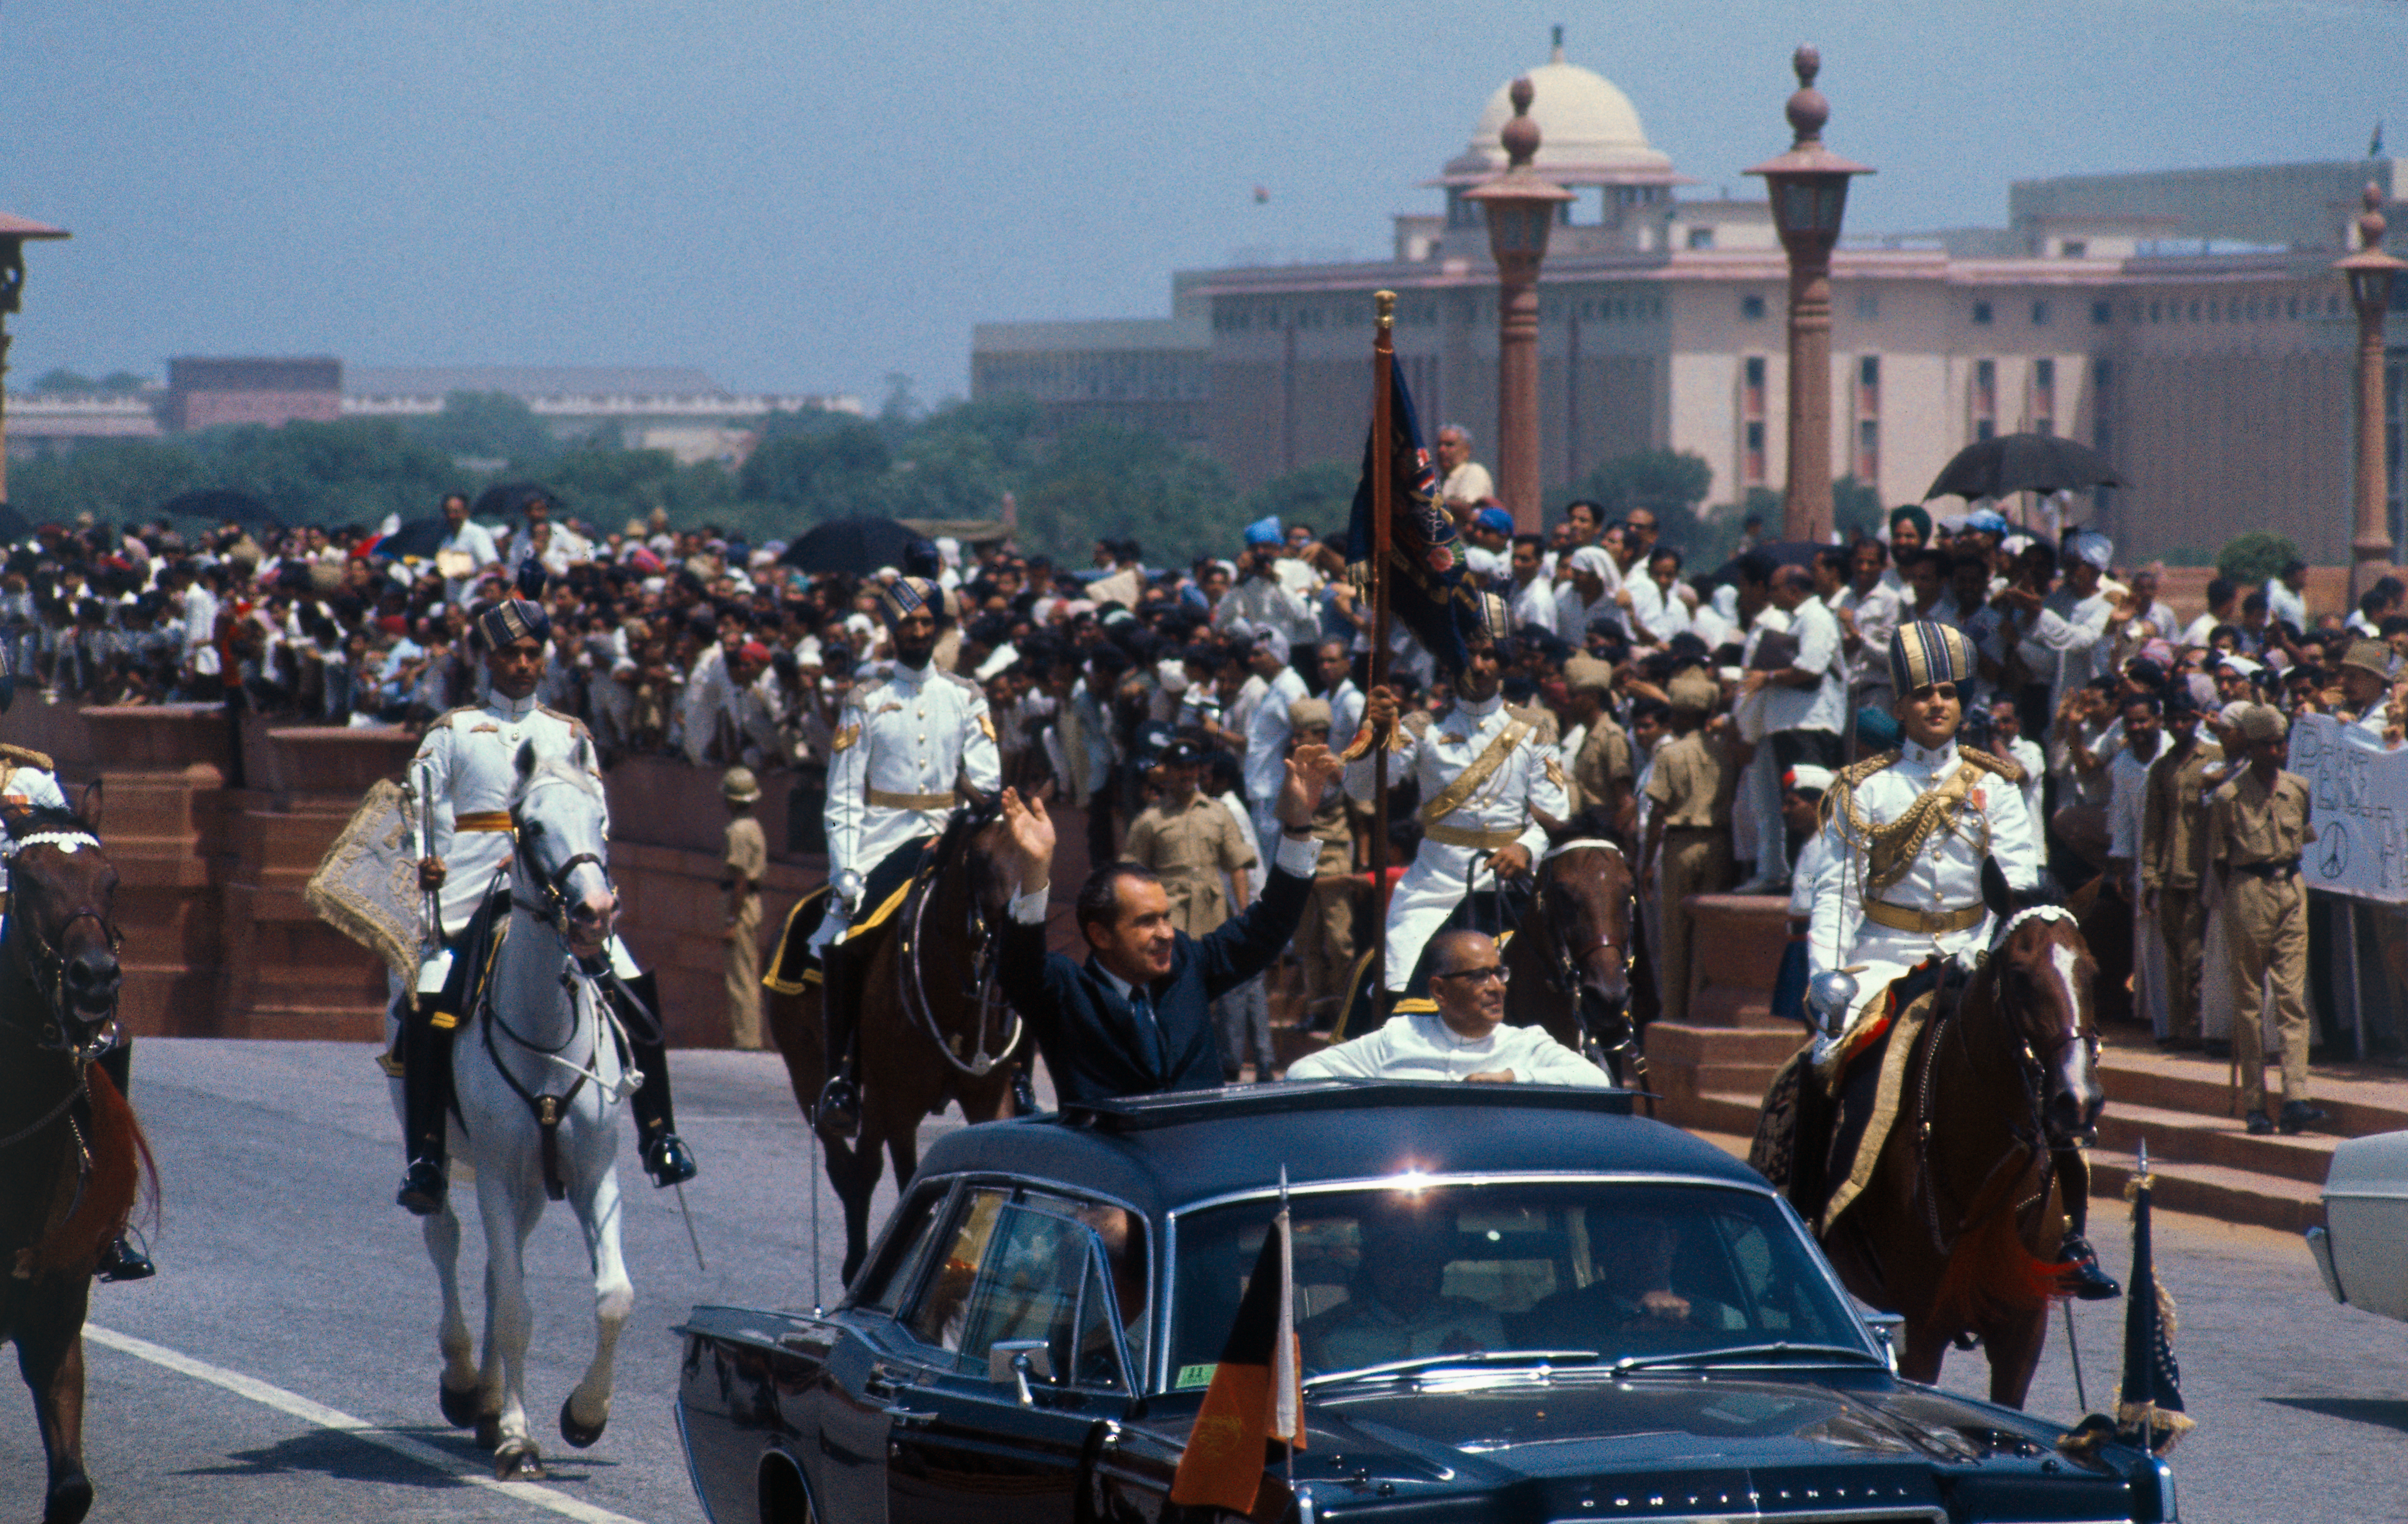 U.S. President Richard Nixon waves to crowds as he rides in open car with the acting president of India, Mohammad Hidyatullah, in motorcade from airport on July 31, 1969. (Bettmann Archive/Getty Images)